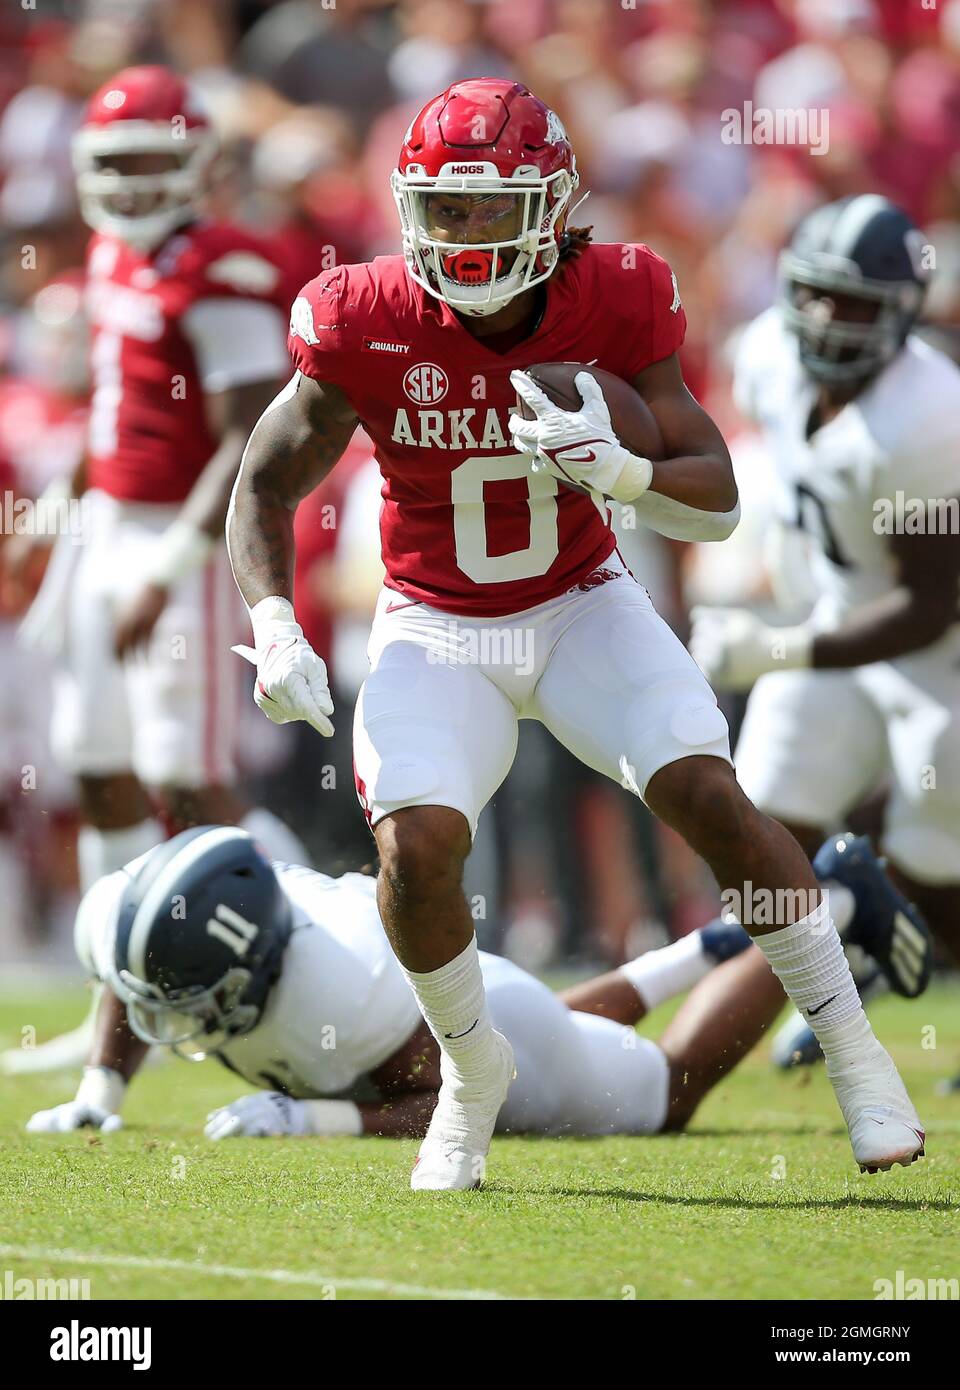 September 18, 2021: AJ Green #0 Arkansas running back comes up the field with the ball. Arkansas defeated Georgia Southern 45-10 in Fayetteville, AR, Richey Miller/CSM Stock Photo